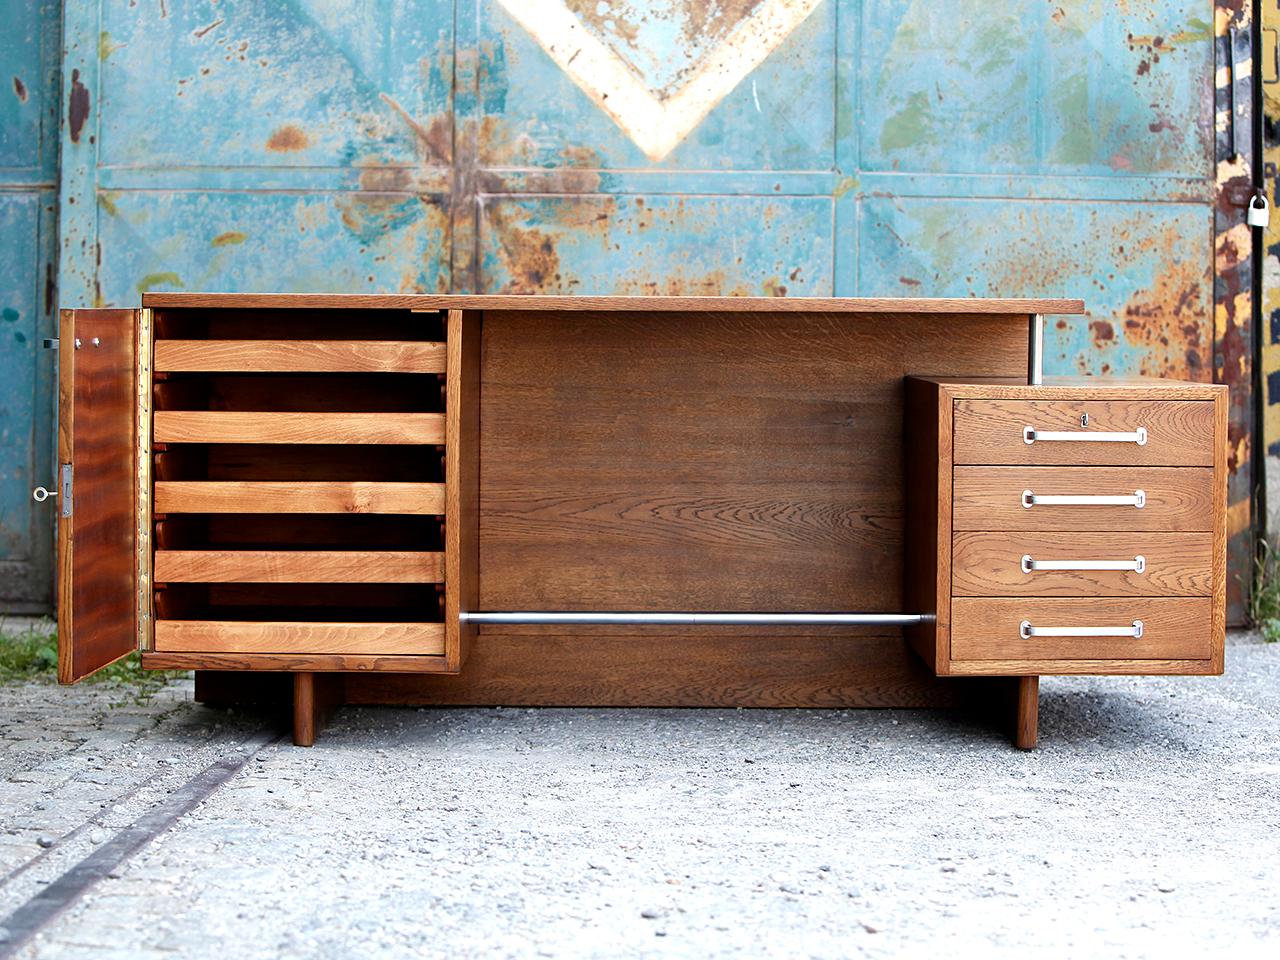 This unusually large freestanding functionalist desk was made in the 1930s in the former Czechoslovakia. Designed by Jiri Kroha (1893-1974), attributed. J. Kroha worked as an architect, designer, sculptor and painter. Execution in the early 1930s